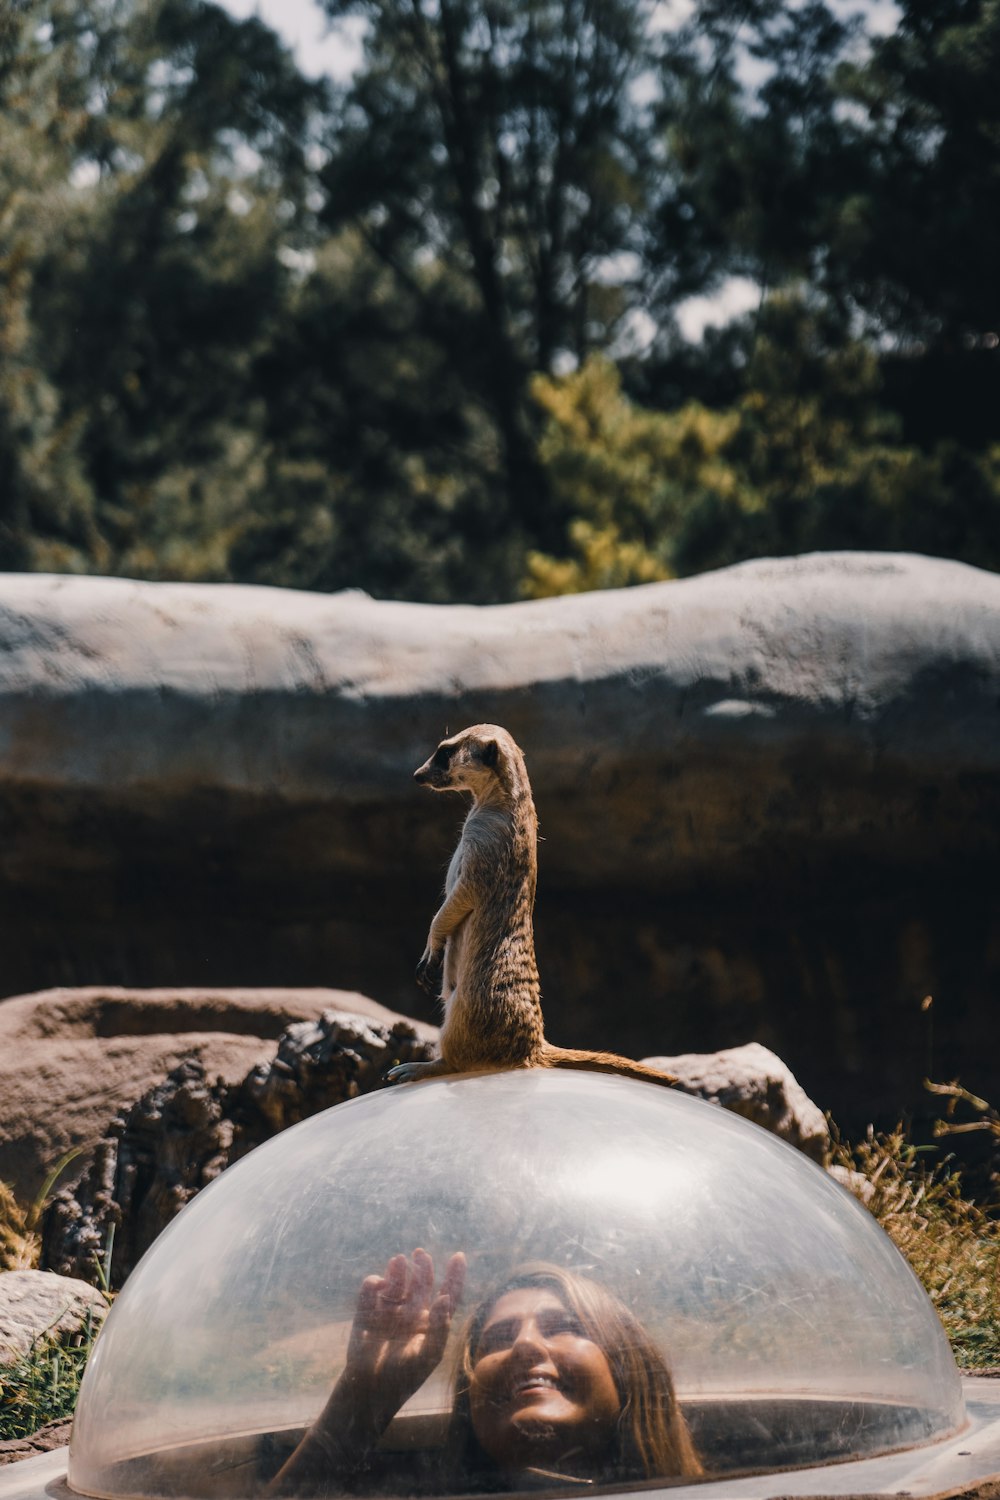 meerkat on glass dome surface during daytime